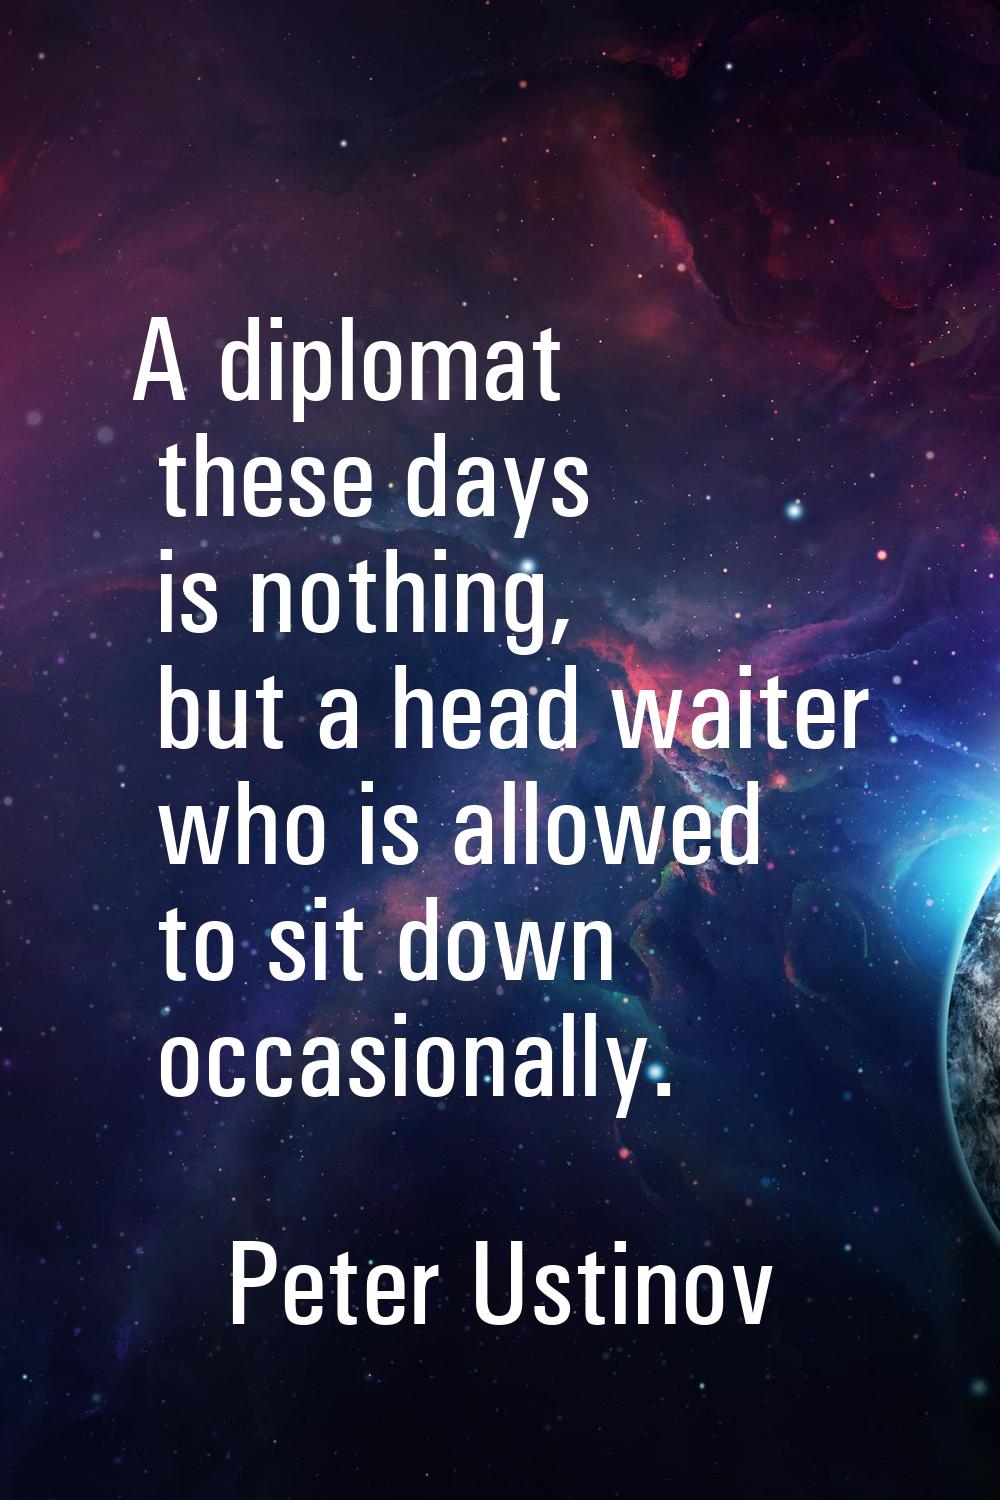 A diplomat these days is nothing, but a head waiter who is allowed to sit down occasionally.